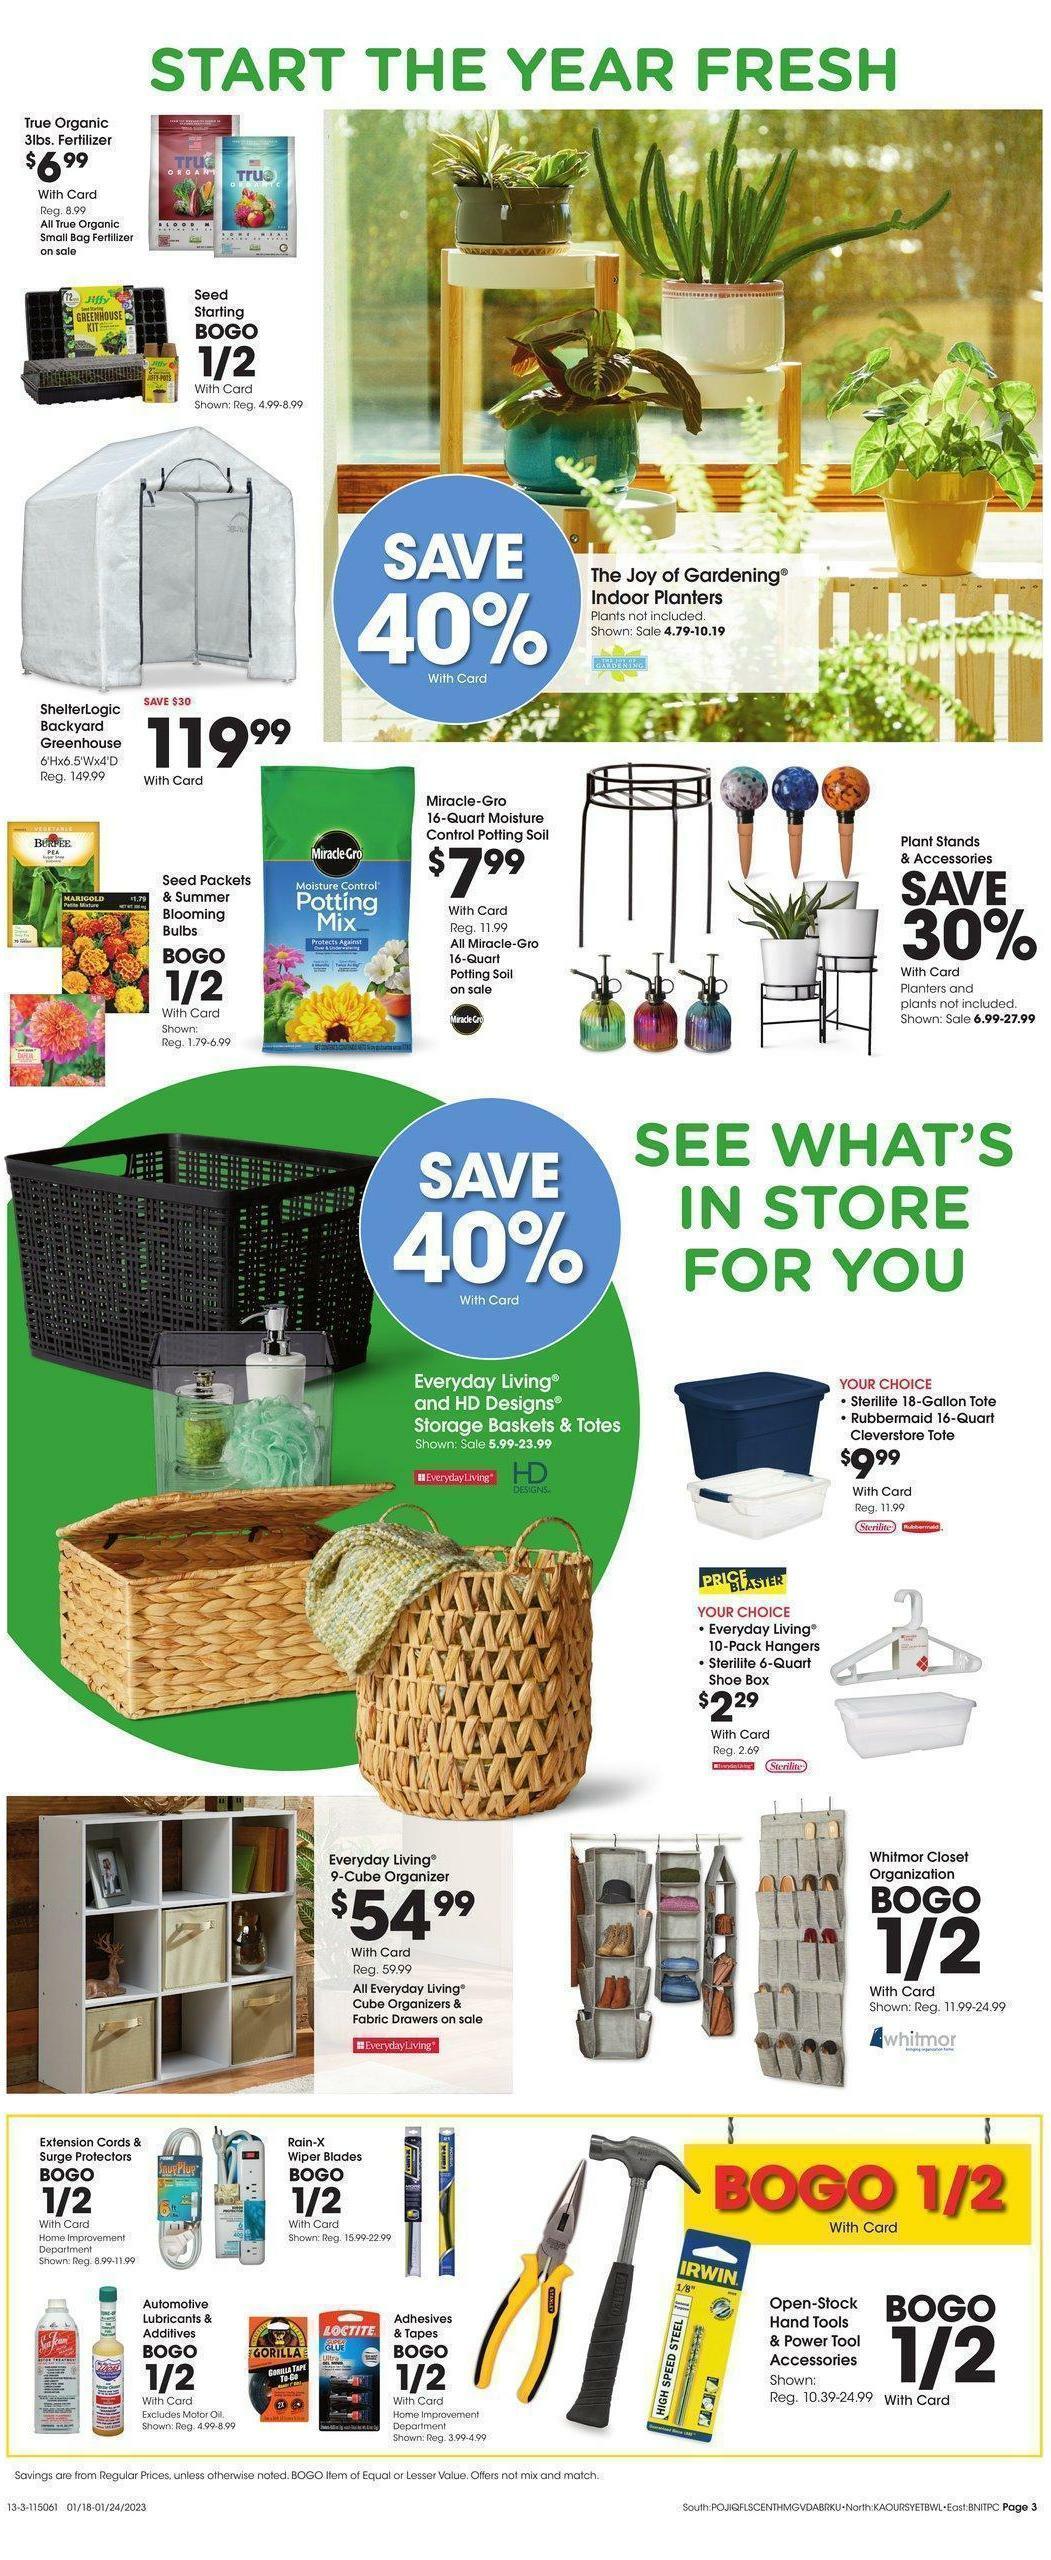 Fred Meyer General Merchandise Weekly Ad from January 18